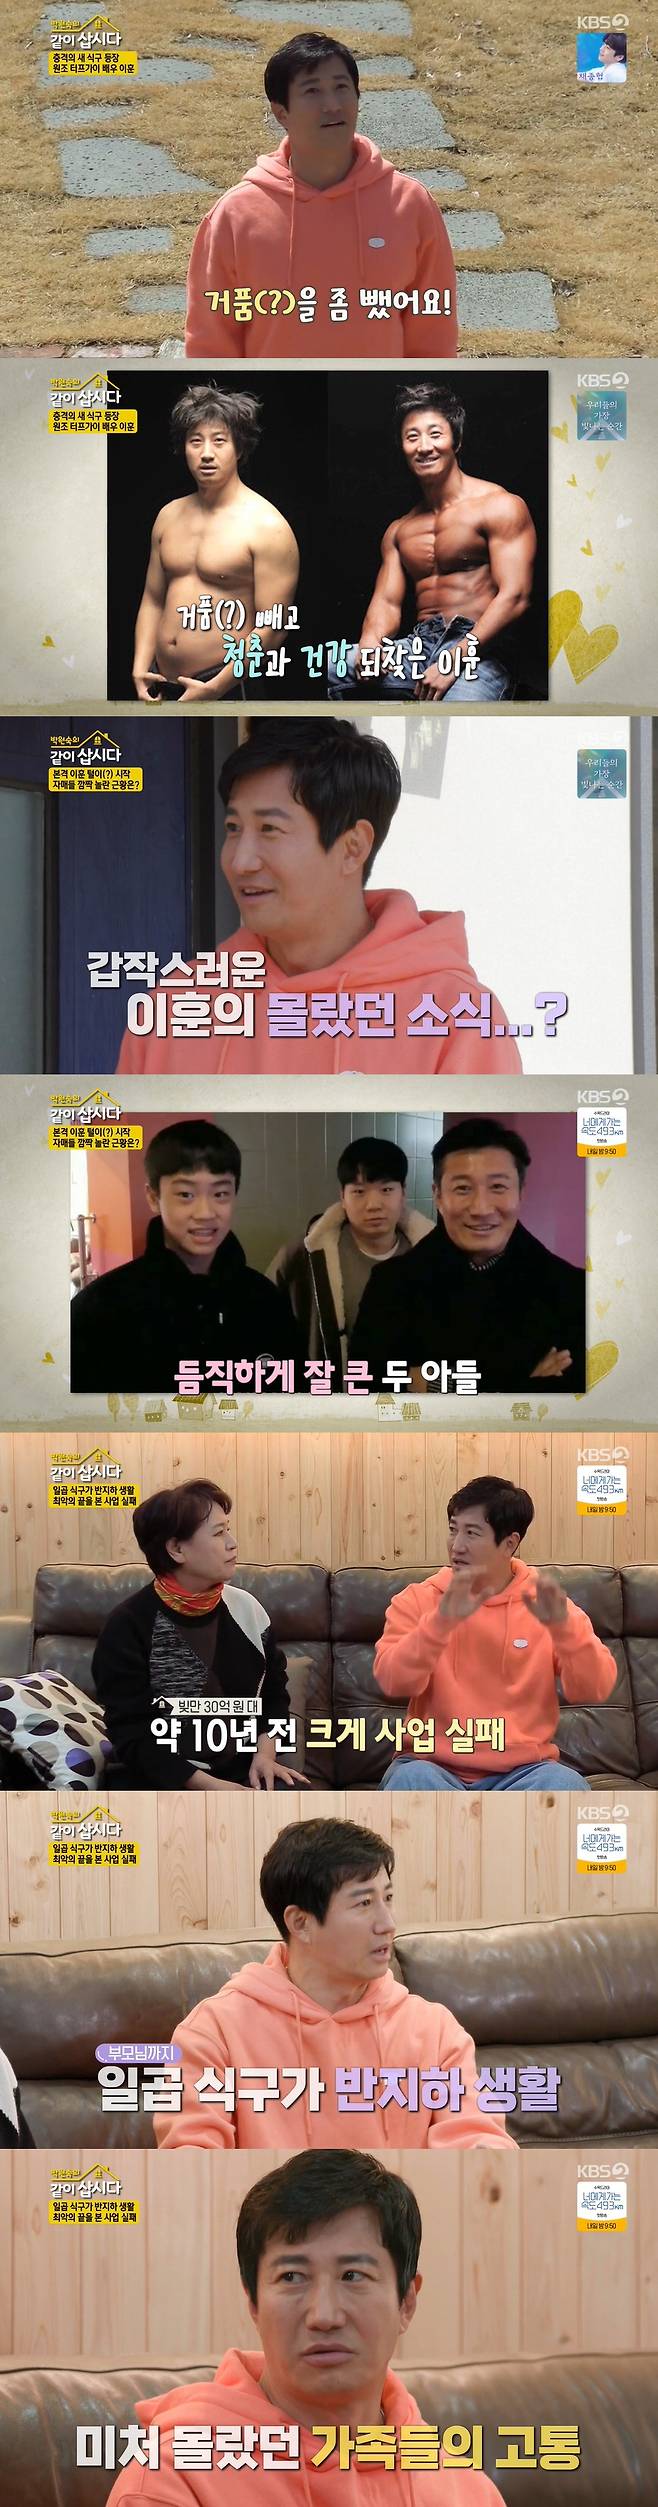 I recalled the days when Actor Lee Hoon was struggling with business failures.On the 19th KBS 2TV Lets Live With Park Won-sook Season 3, Park Won-sook, Hye Eun Yi, Kim chung-ui, who moved to a new house, were drawn.Lee Hoon appeared in a new house with Park Won-sook, Hye Eun Yi and Kim Chung.The three people who saw Lee Hoon were prettier than before, and Lee Hoon said, I took a bubble, I lost 10kg.Park Won-sook welcomed Lee Hoon but looked worriedly at him, saying, But youre not divorced?Lee Hoon then replied, Did you not hear me? And Park Won-sook was sorry for why did you do it?Park Won-sook, who thought Lee Hoon was divorced, continued to worry, Why are you divorced? So Lee Hoon said, Im joking, Im living well.I came here because I needed a worker because my seniors moved in. Lee Hoon, who is 50 this year, said: My first son is 21 and my second son is a high one; the kids are taller than me, along with photos of Lee Hoons two sons were released.The appearance of two sons who boasted a beautiful visual like their father was warm.Lee Hoon said, I thought the most important thing for a man was to name his two sons righteousness, but the second name was Iri.So I made it friendship, he said. But I do not like the children because their names are too rustic.Park Won-sook said carefully, I learned through the broadcast that you were having a hard time.Lee Hoon recalled that he had failed to do business 10 years ago and owed 3 billion won, saying, It was a lot of hard work. I was kicked out of my house and lived in a ring room.I did not know, but after a while my wife and children had a lot of hardships. I thought it was hard for me, so I could not be friendly to my wife.I was so angry when I came home after drinking because it was hard to fail in business. I thought that I had overcome it after that, and my wife and children had a lot of trouble. Lee Hoon smiled, But now I see the end of the tunnel, I did not see it in the dark, but after 10 years I see it now.I can see the end now, said Hye Eun Yi, who felt Lee Hoons feelings.Park Won-sook said, Dont do some business, and Lee Hoon was real, and he was deeply sympathetic.Lee Hoon also recalled his relationship with his son, Park Won-sook, who died.He went to the store where Park Won-sooks son was running and drank and played frequently. At that time, I think my brother told my teacher that he had been drinking with Hoon.So the teacher called me directly and said, Enough drinking X, and Park Won-sook laughed, There is no memory.I did and (heard the news) Chest was so sick, so I cant watch (the broadcast) without tears, Lee Hoon said.Lee Hoon, who had a relationship with Park Won-sook through a past work, said, I marriage shortly after the drama.At that time, I told him that he was marriage, and he said, Why do not you do that? Park Won-sook, who heard this, laughed, saying, I was crazy, I was married again. I do not think human thoughts.Lee Hoon, who marriages his wife when she was 27 years old after eight years of love with his first love, replied, My wife is the most comfortable drink friend now.Before you sleep, you drink a bottle of shochu, mainly talking about your son, drinking, and then sleeping, he said.